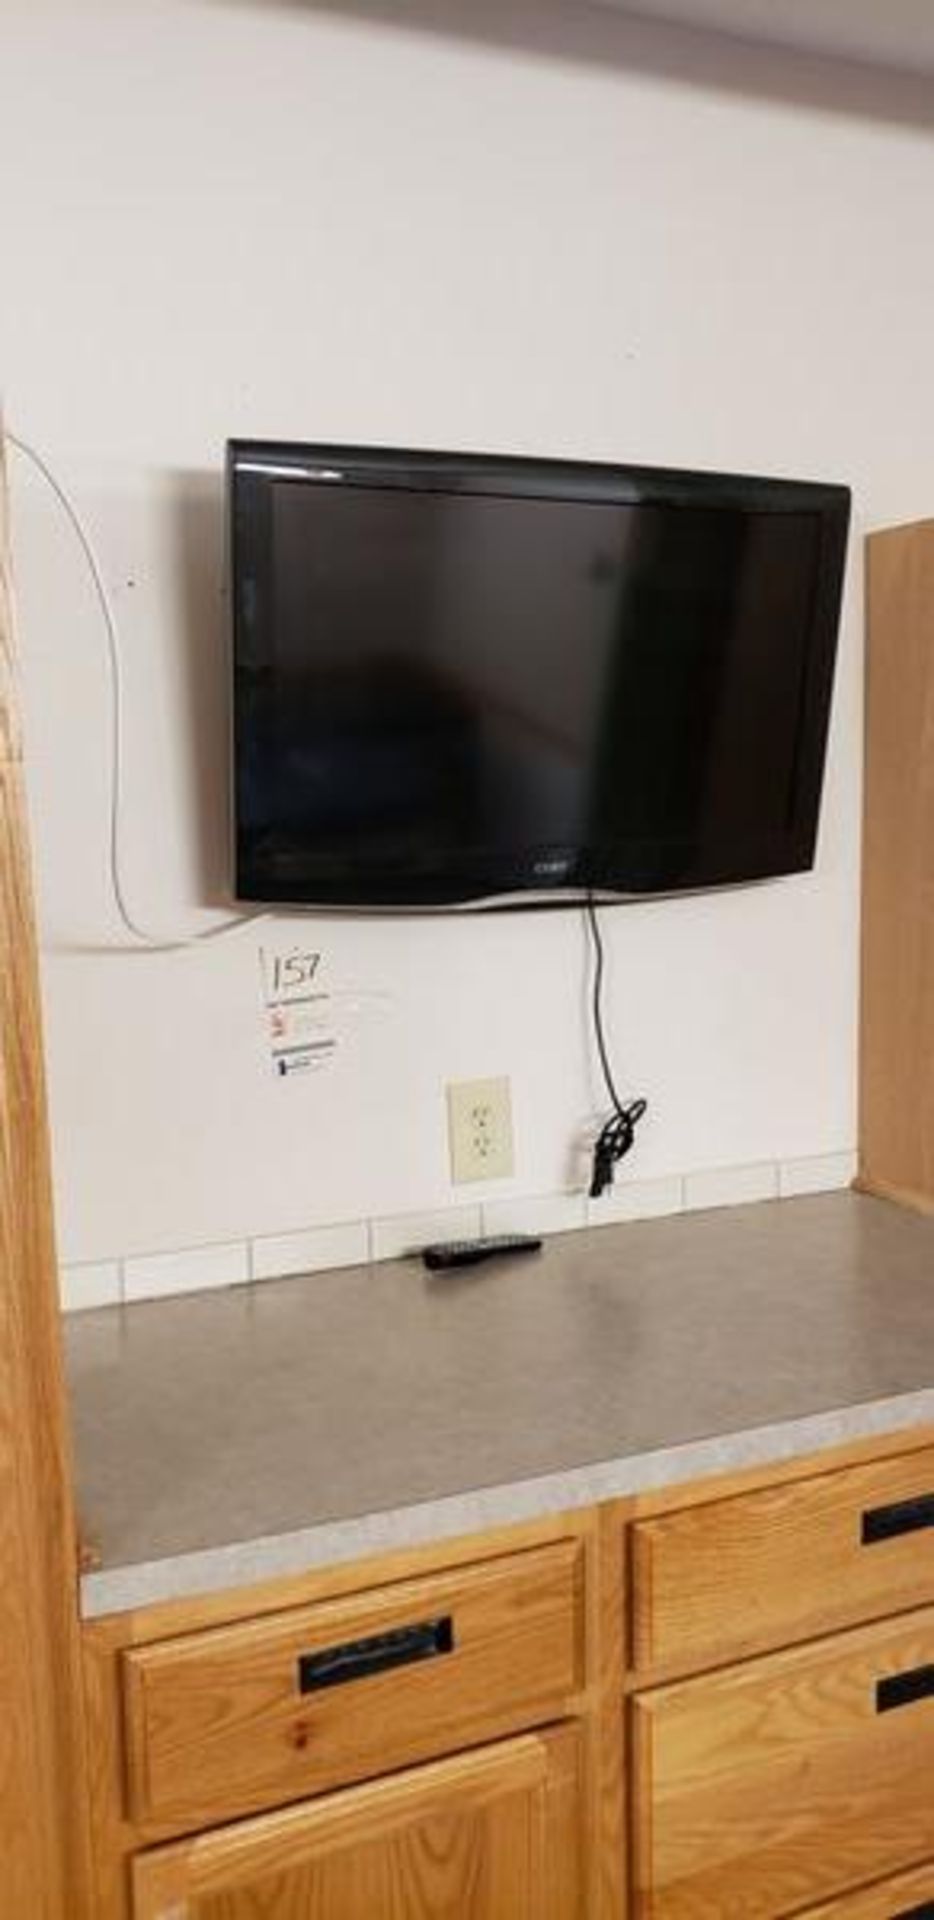 32" COLBY FLAT SCREEN TV